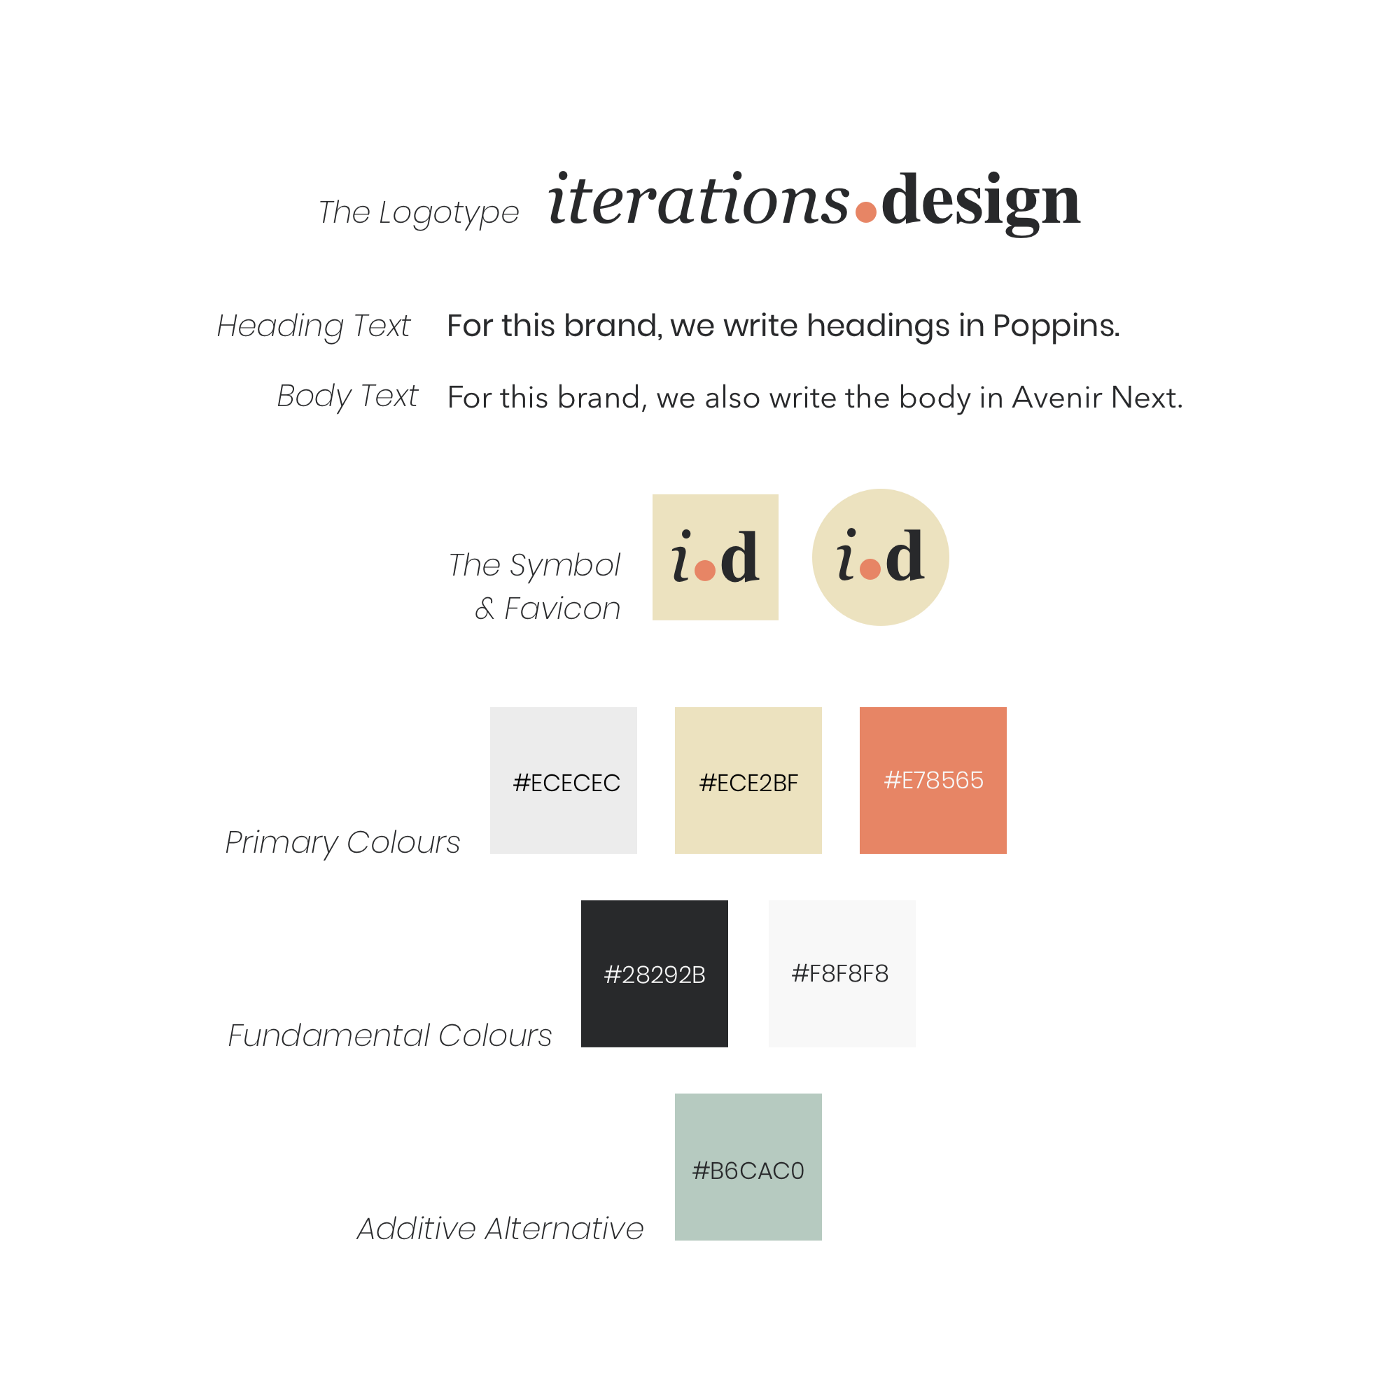 iterations.design brand guidelines with headings, body, symbols & colours.